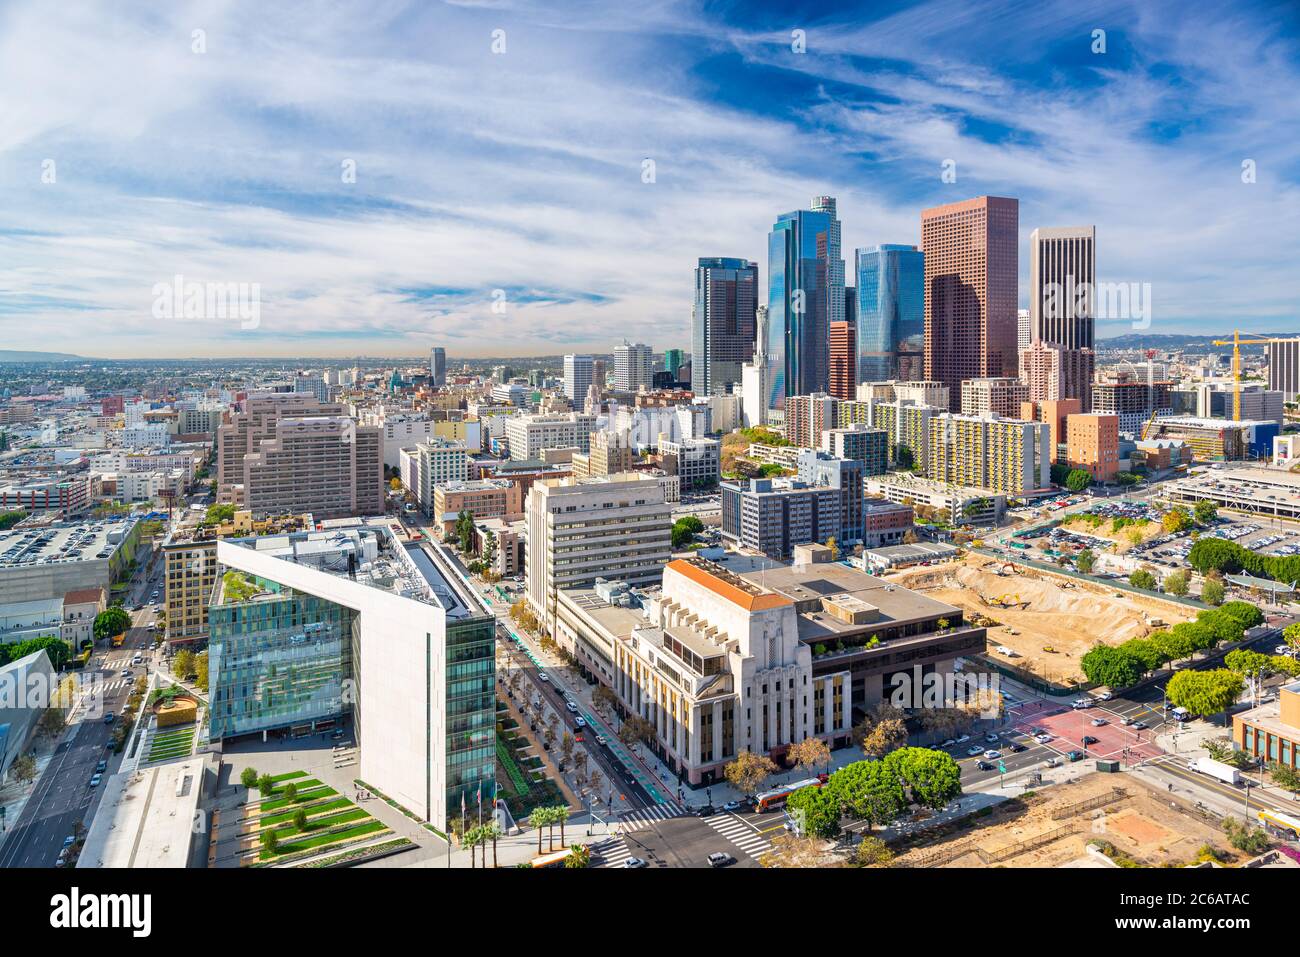 Los Angeles, California, USA Downtown Aerial Cityscape Stock Photo